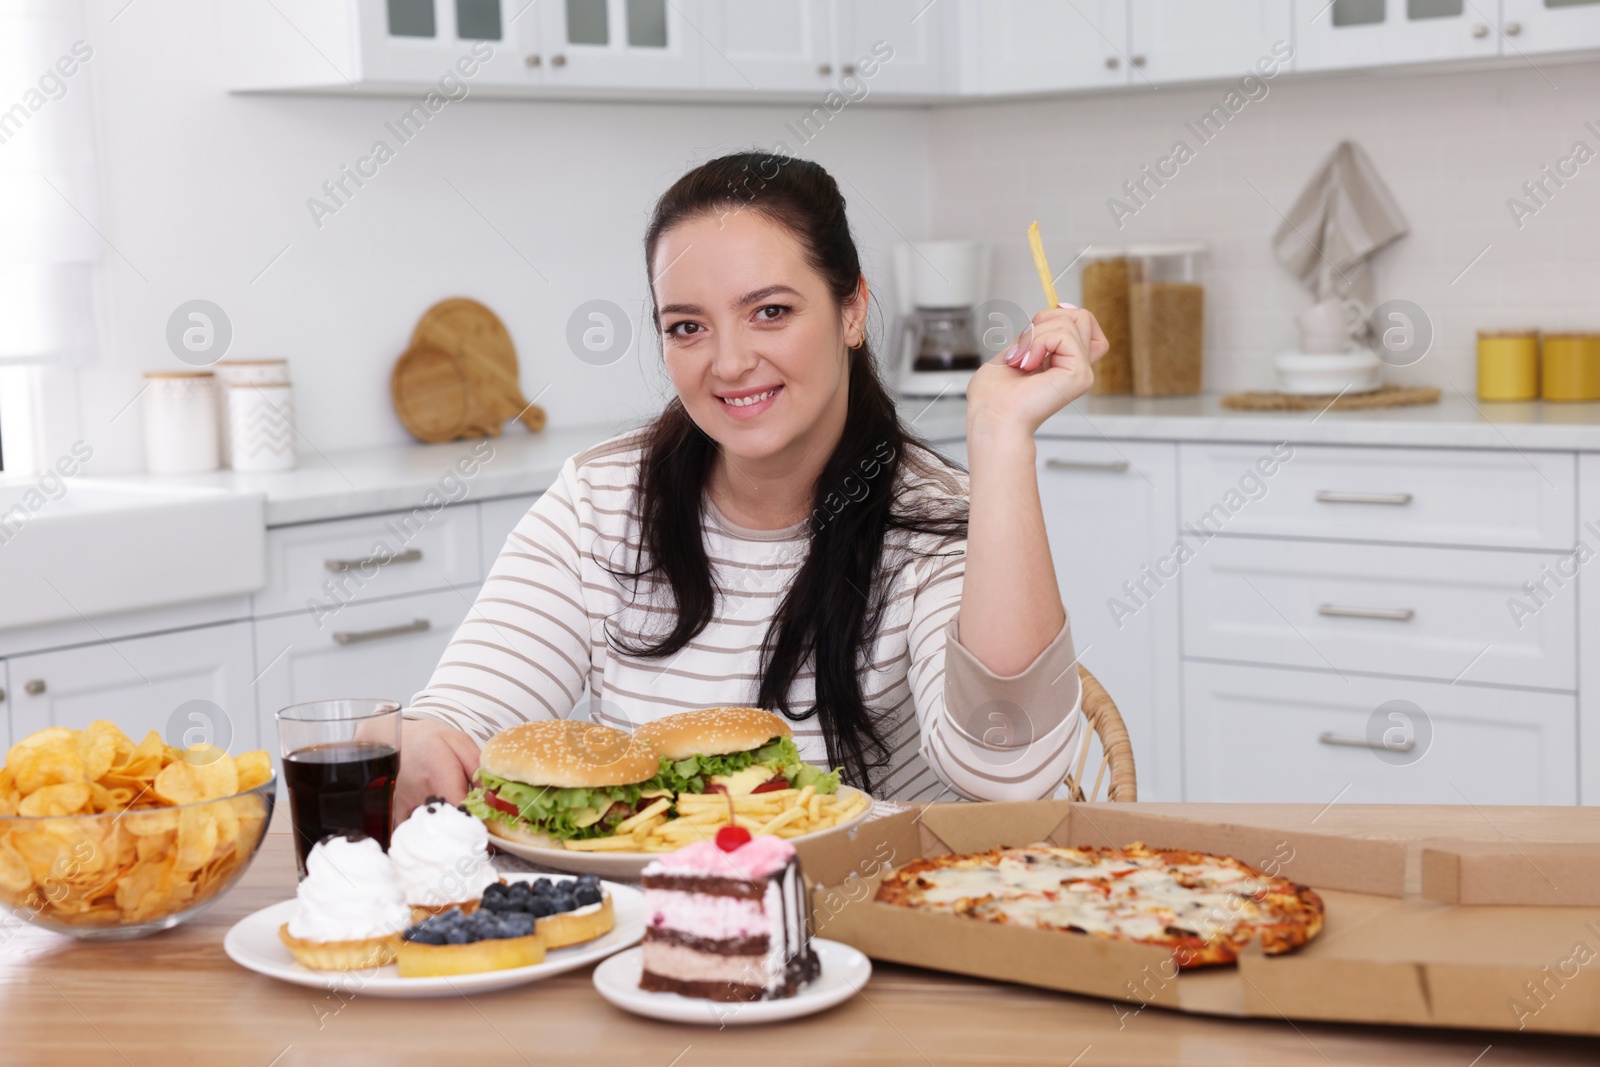 Photo of Happy overweight woman with unhealthy food in kitchen